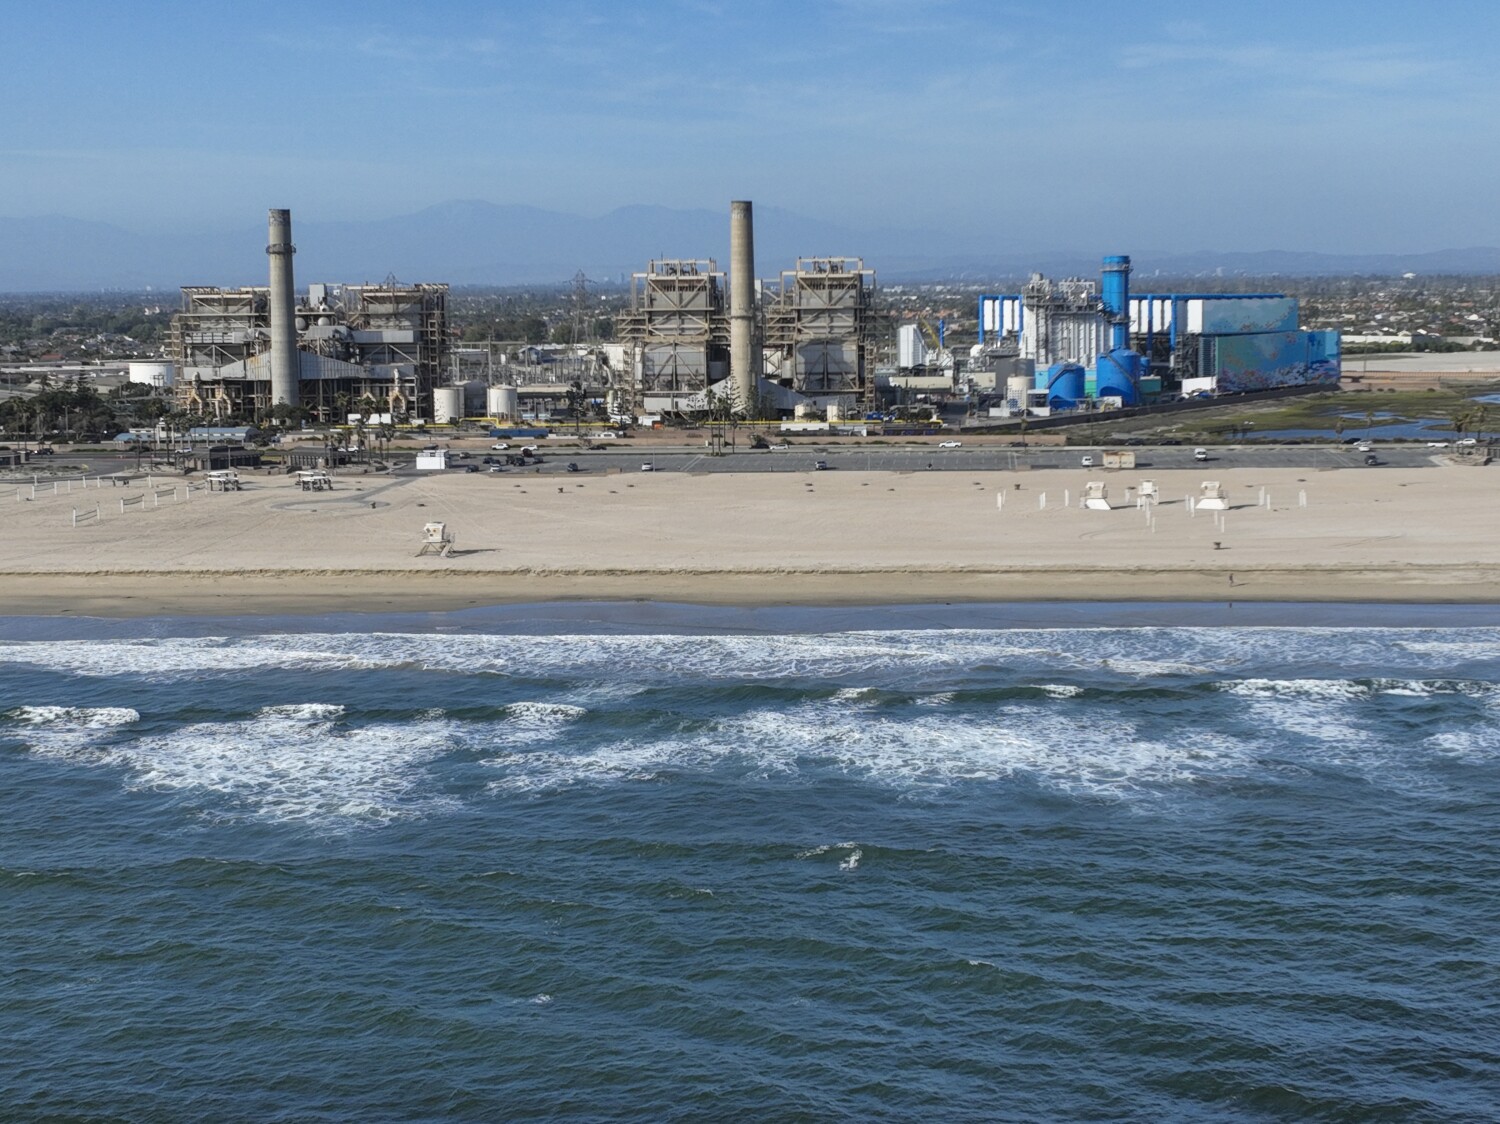 Column: Five things Gov. Newsom got wrong in supporting Huntington Beach desalination plant